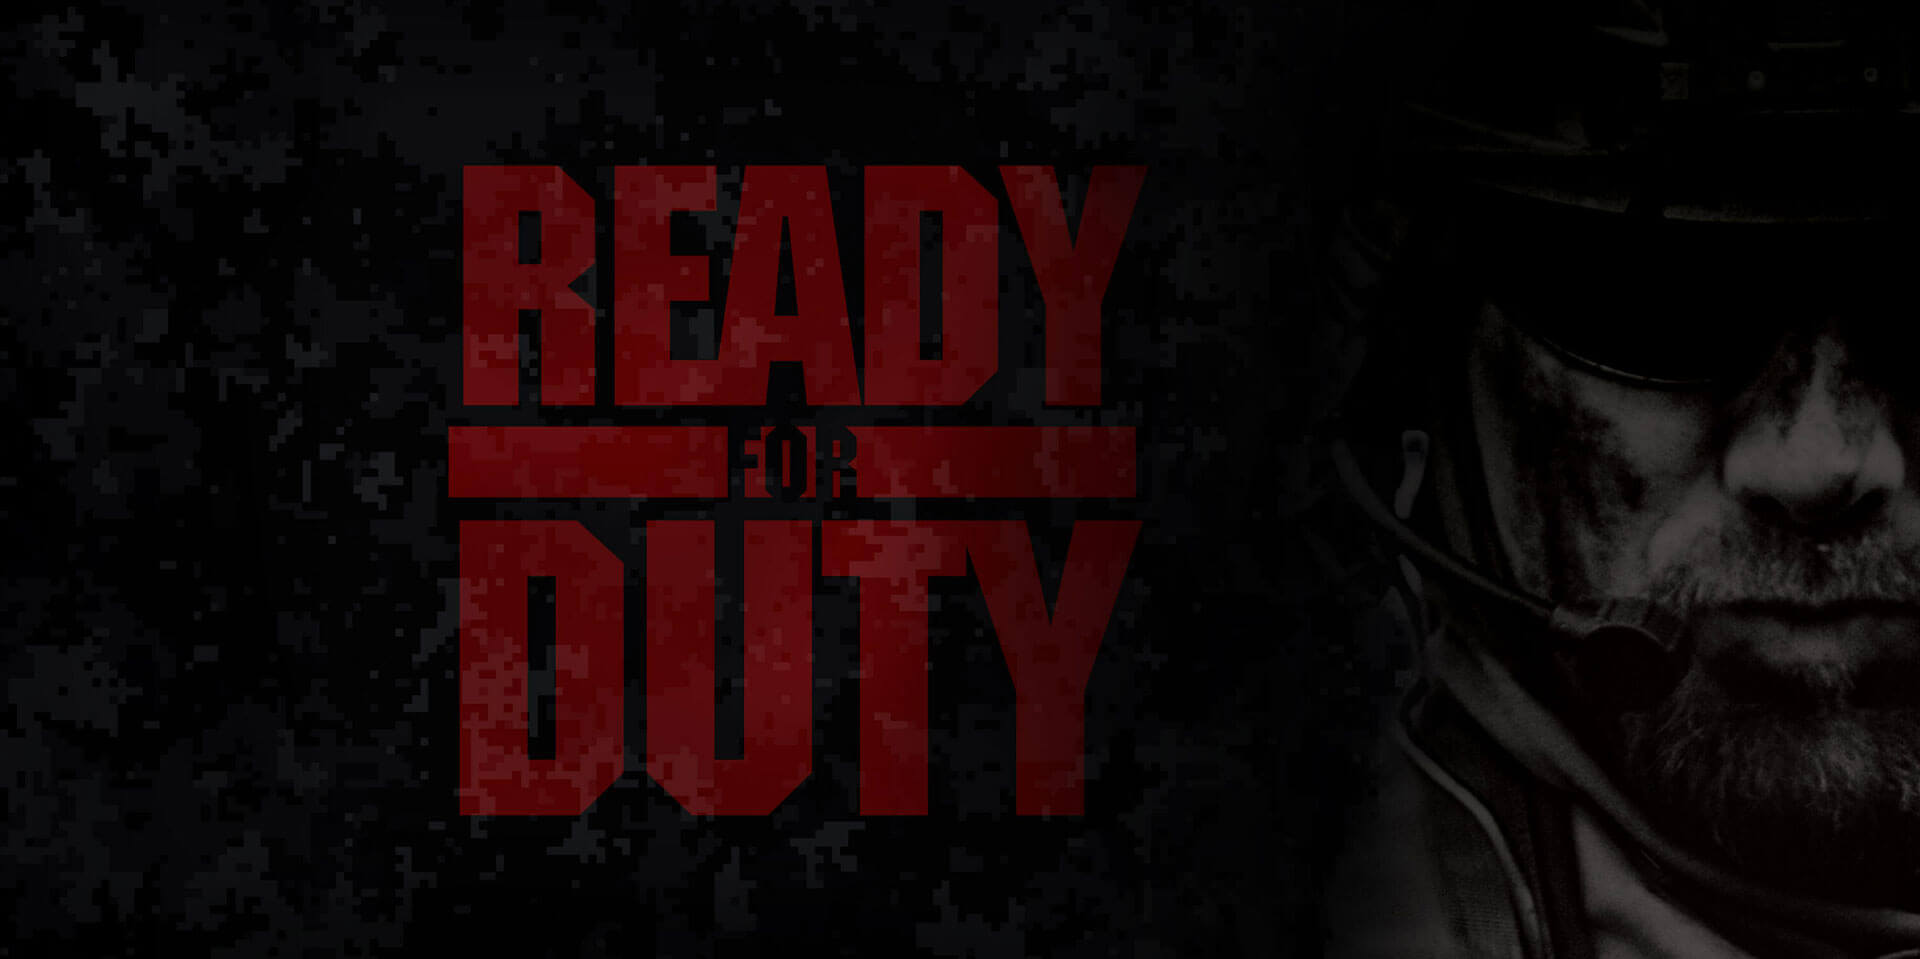 Black OPS 2018 – Ready for Duty